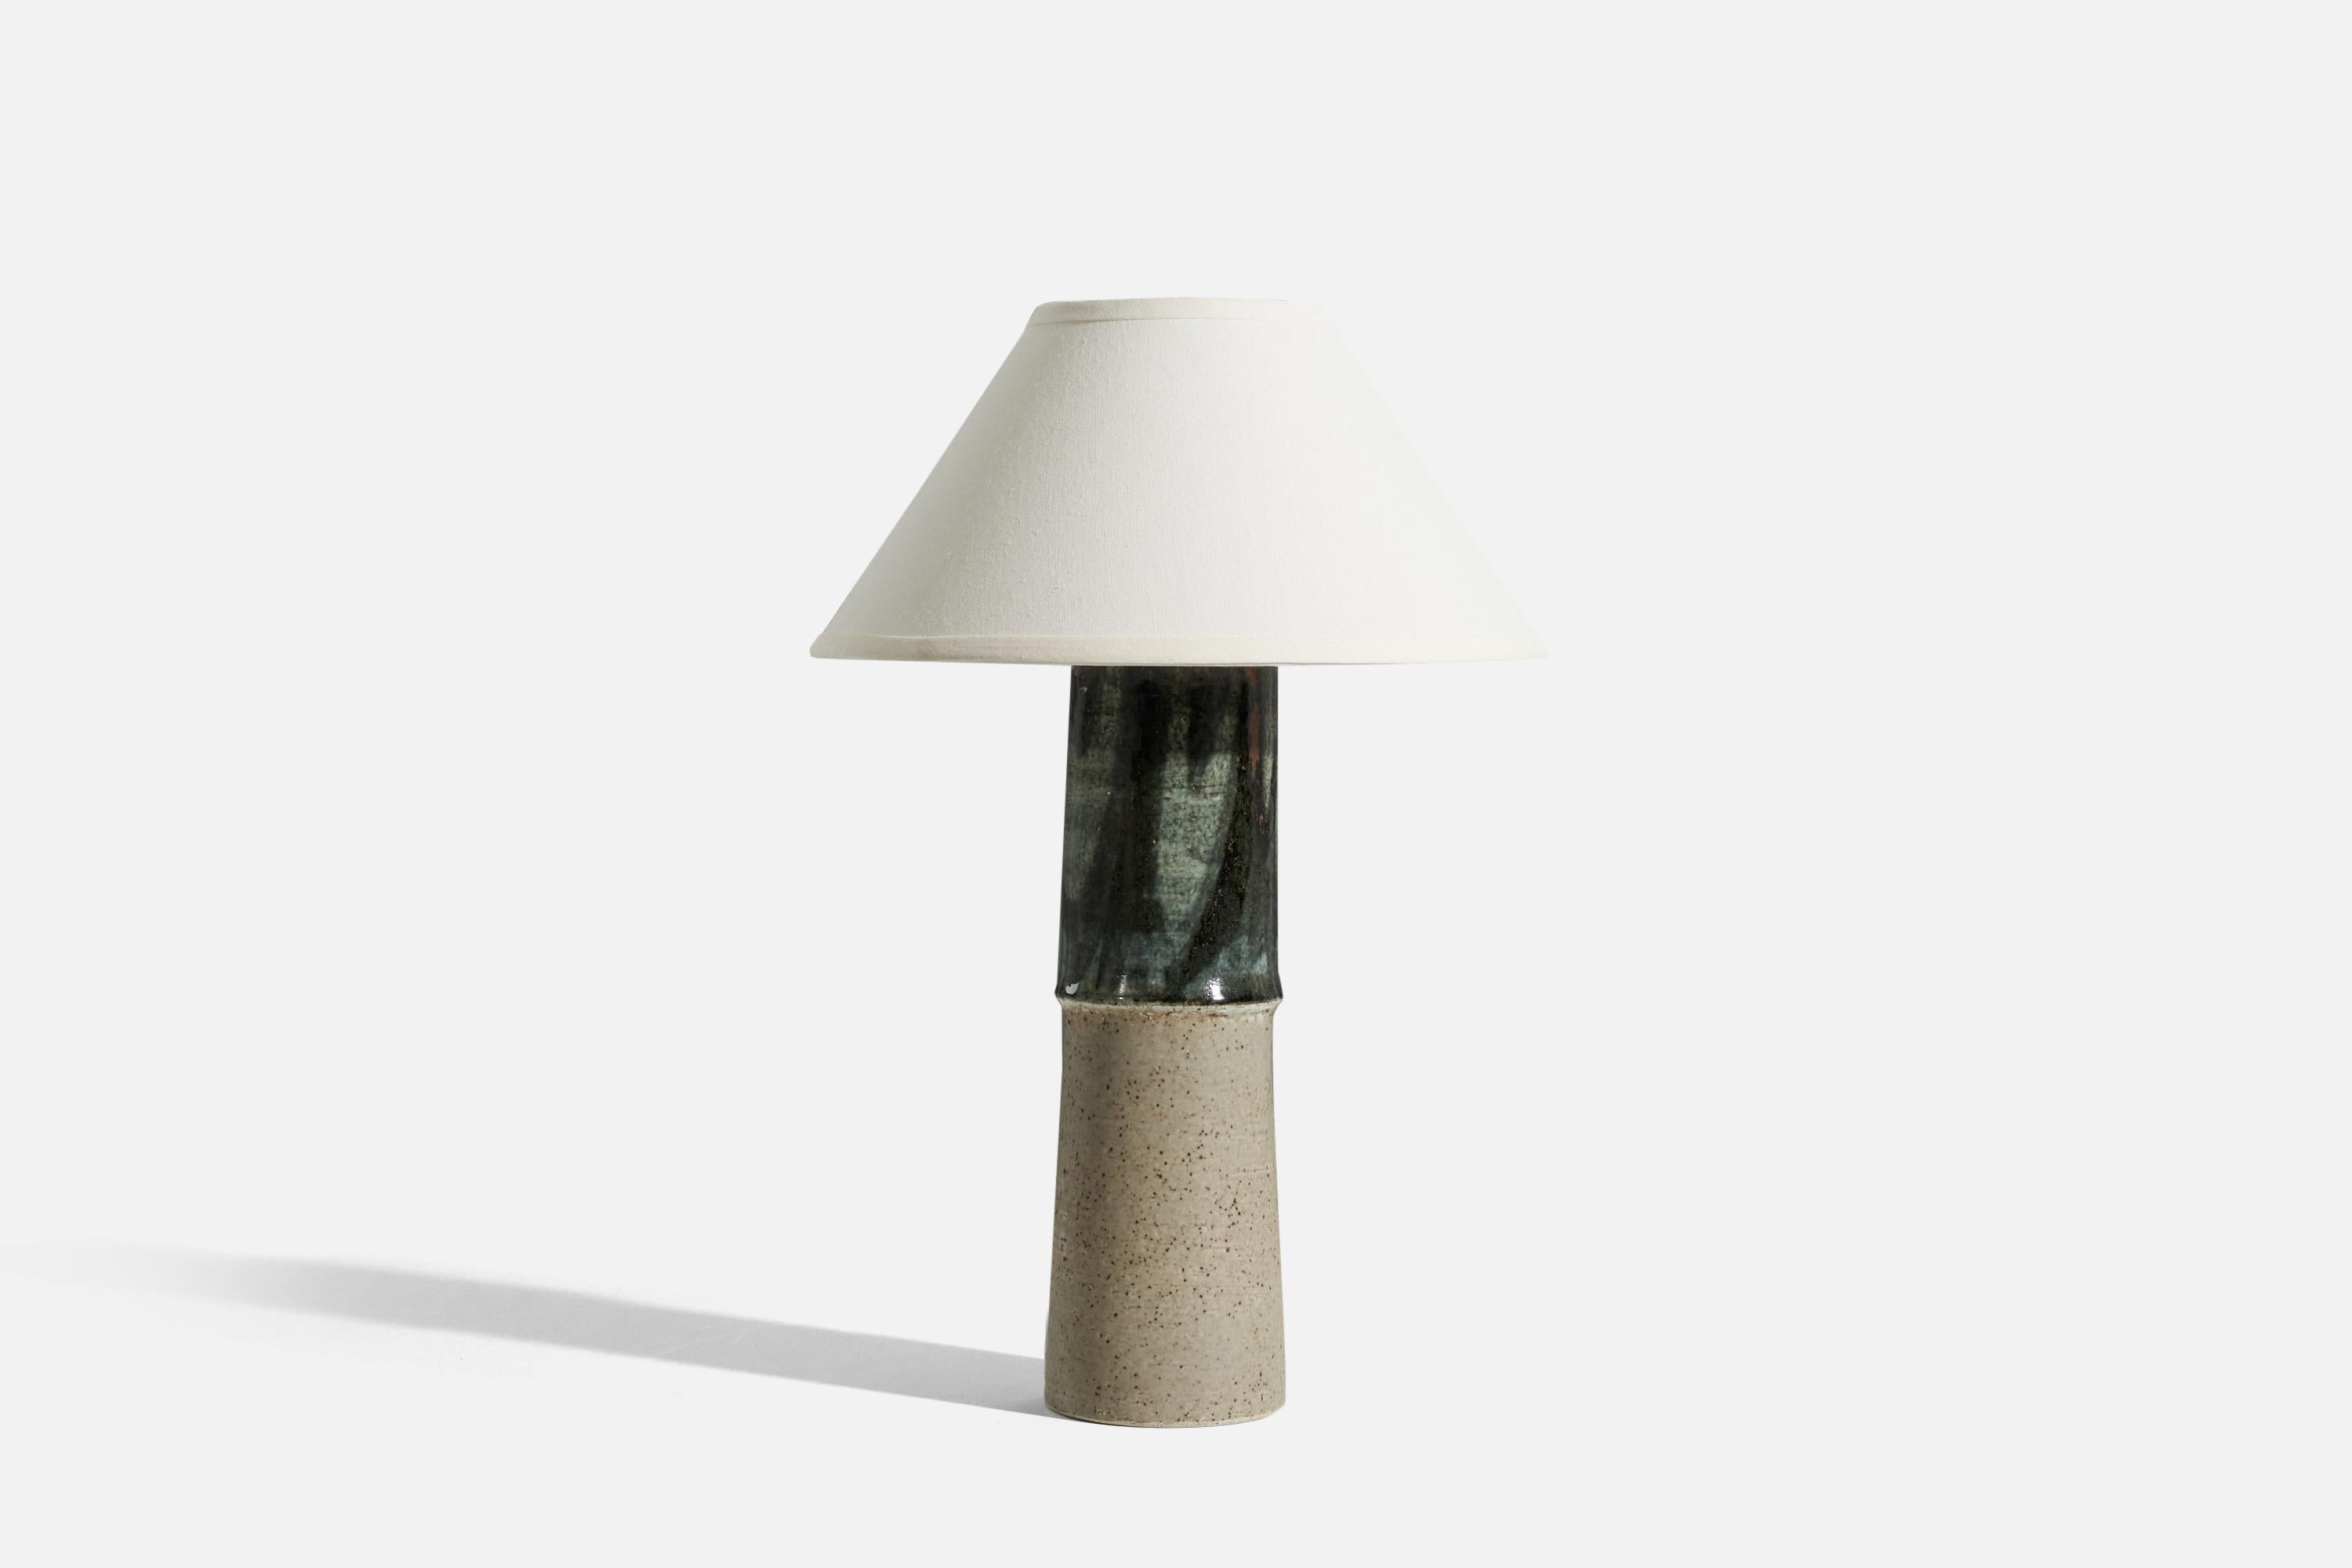 A stoneware and green glazed table lamp, designed by Olle Alberius and produced by Rörstrand, 1960s. 

Sold without lampshade. 
Dimensions of Lamp (inches) : 18.625 x 4.75 x 4.75 (H x W x D)
Dimensions of Shade (inches) : 5.75 x 14 x 8 (T x B x